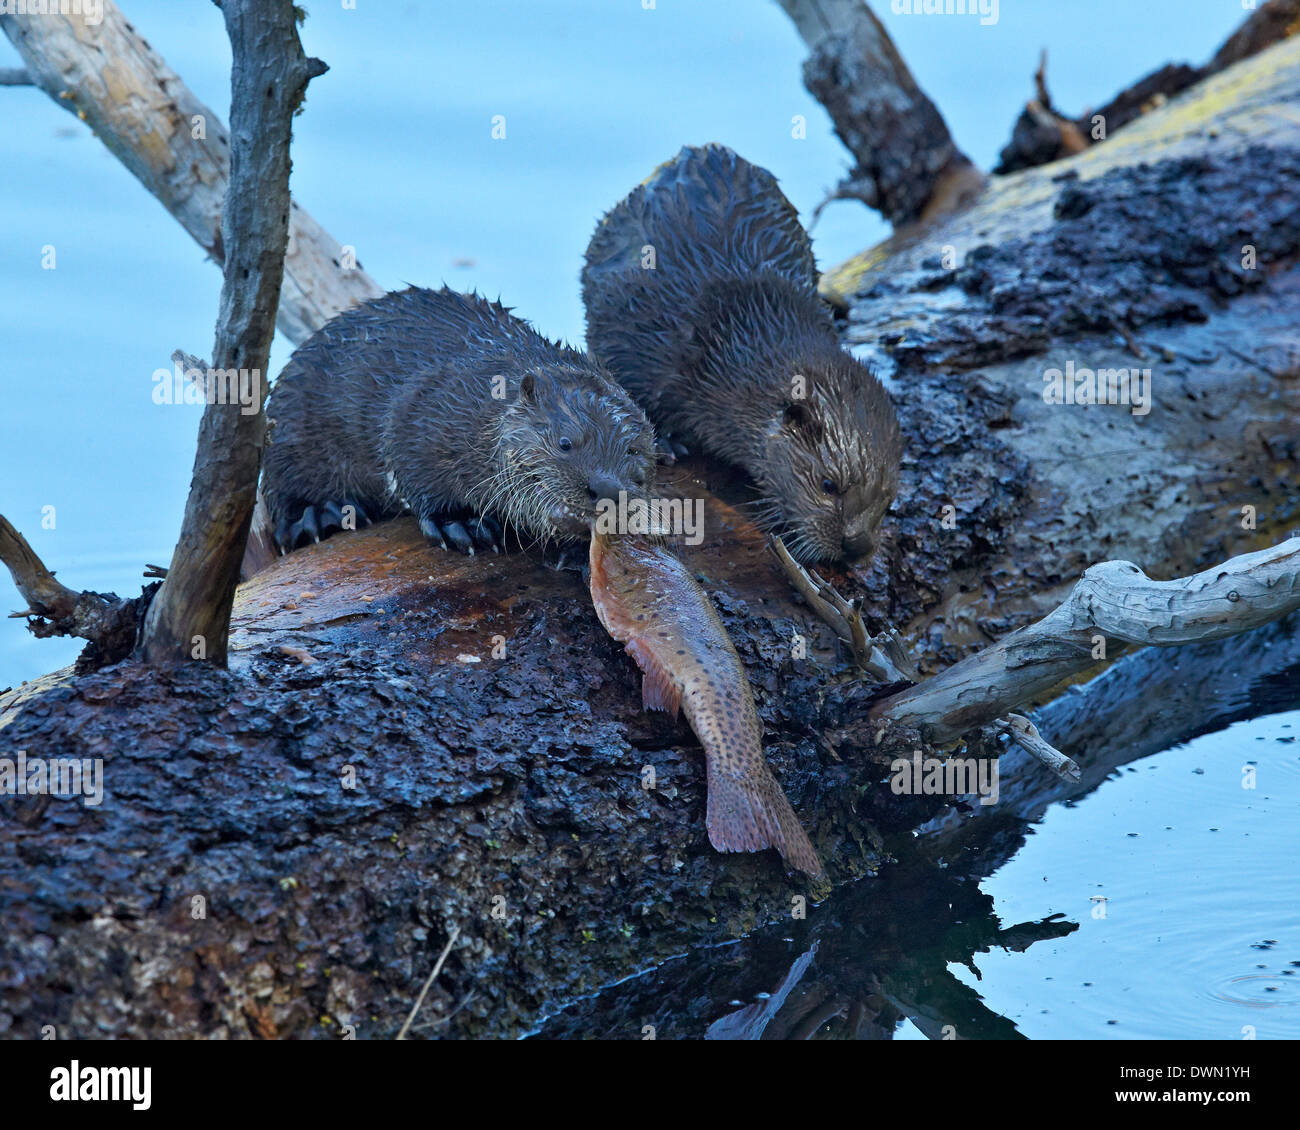 River Otter (Lutra canadensis) pups, Yellowstone National Park, Wyoming, United States of America, North America Stock Photo